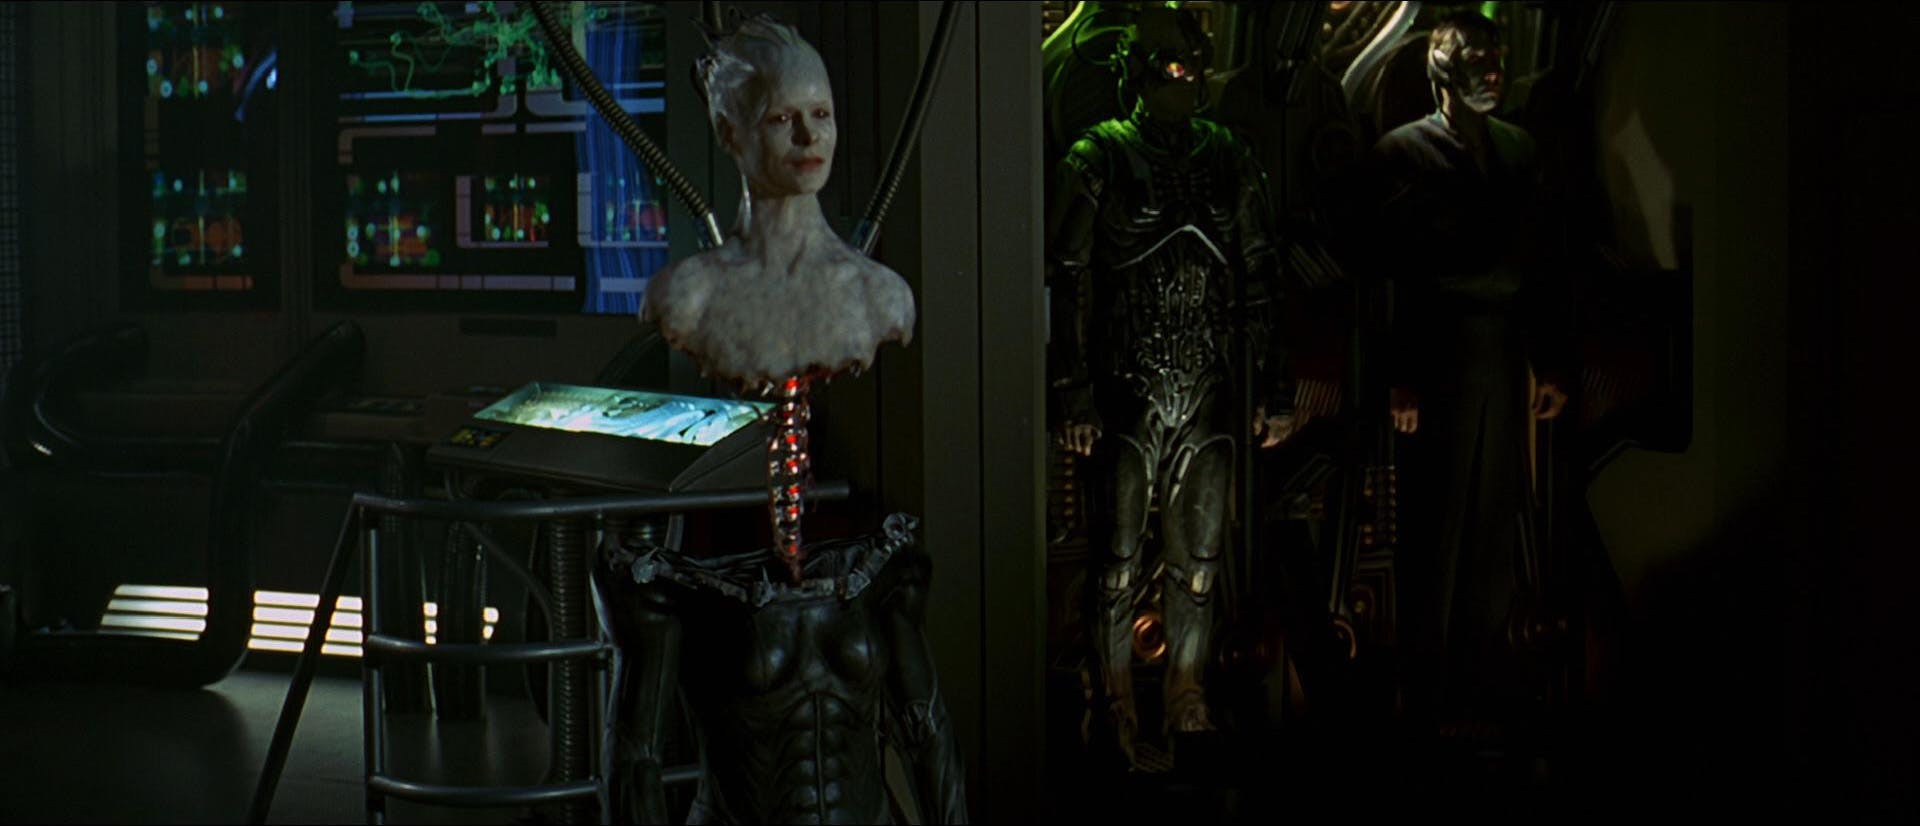 Hanging from tubing, the Borg Queen connects her vertebrae to a body as her borg hive stands behind her in 'Star Trek: First Contact' 